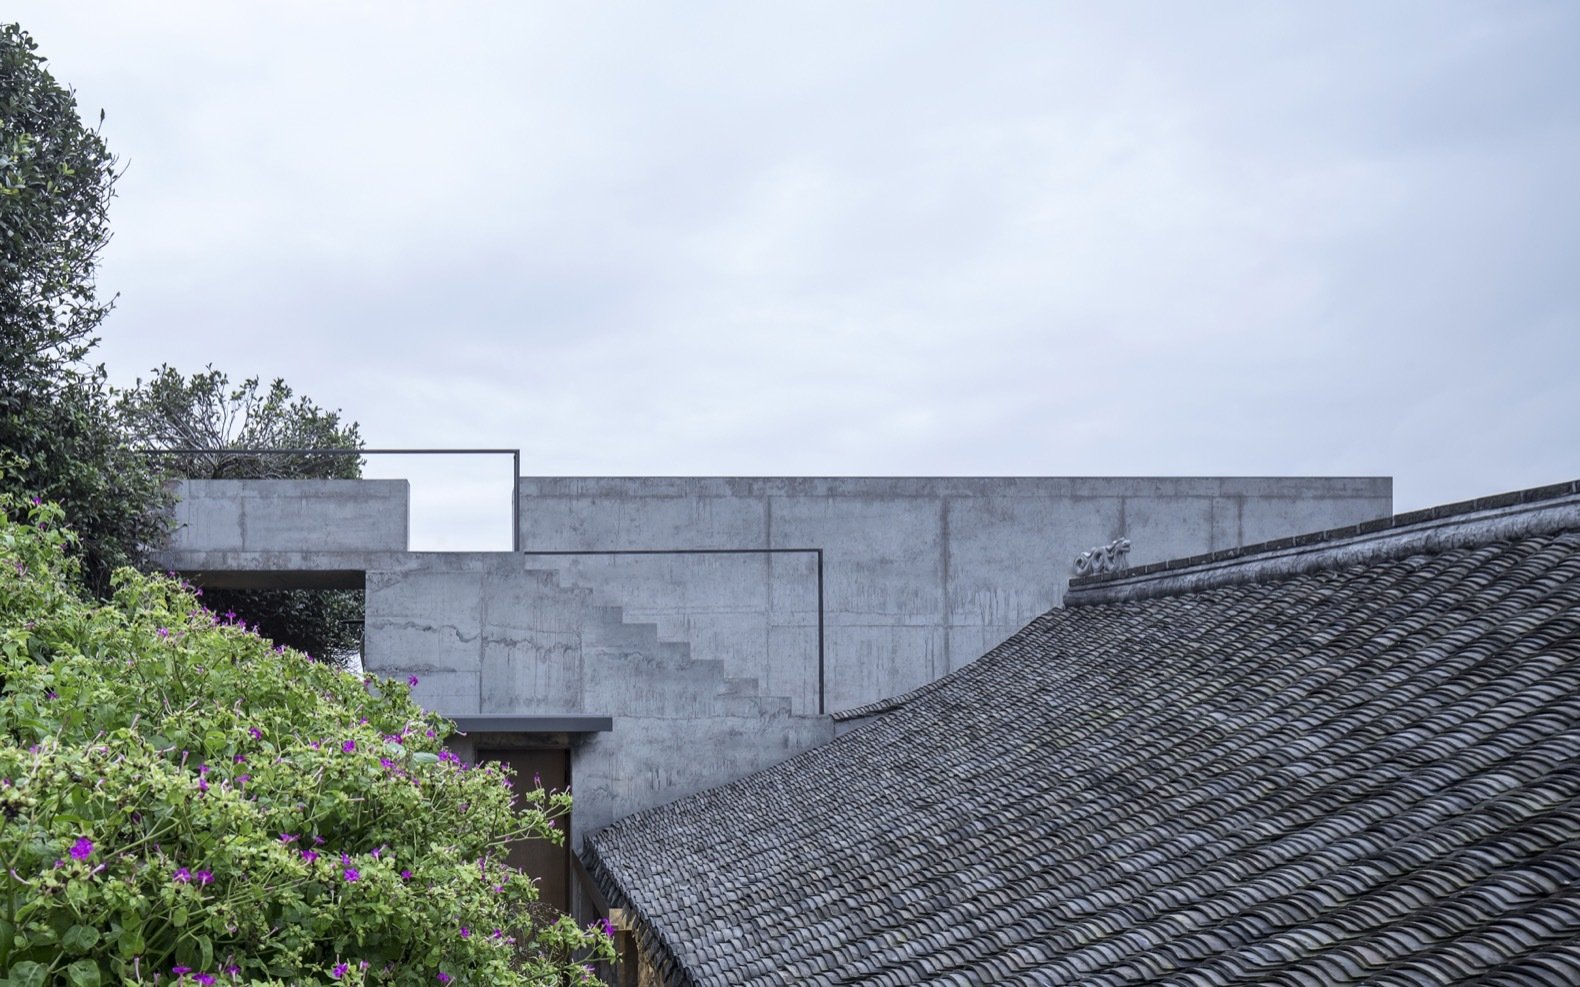 concrete-steps-lead-up-to-the-concretes-extensions-roof-deck-and-also-connects-to-the-courtyard-of-the-second-building